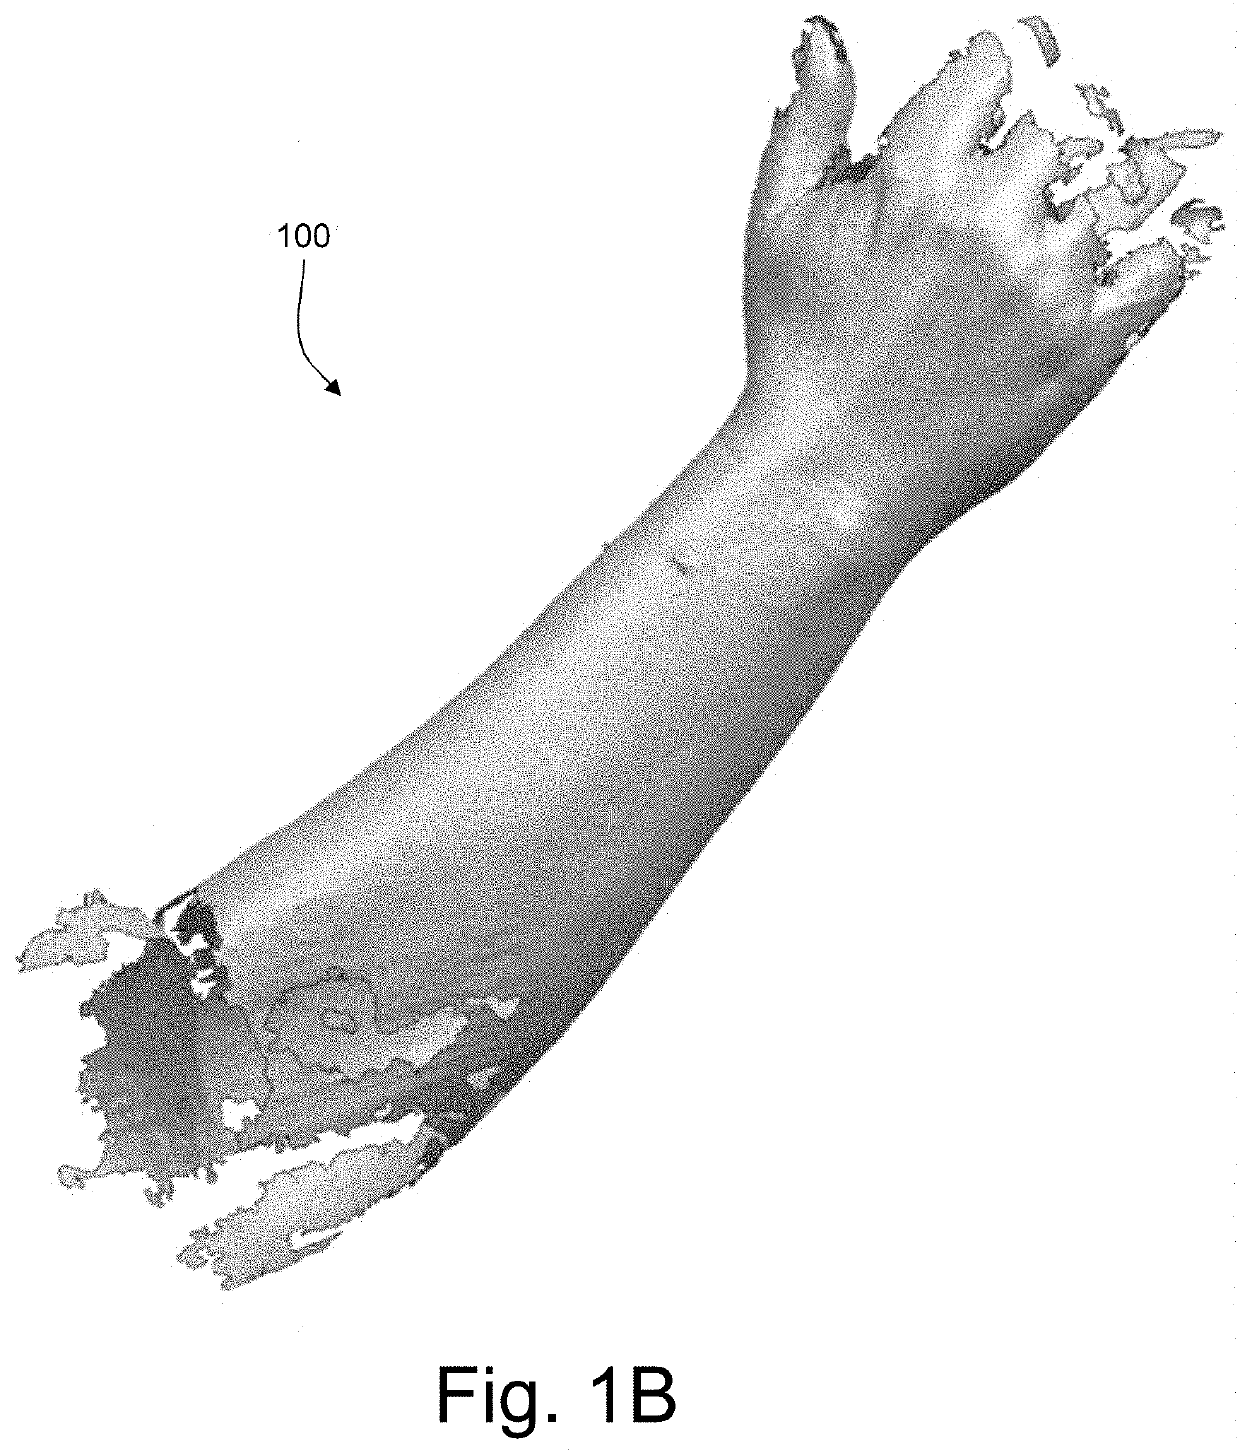 Production of a custom medical splint or brace for immobilization of a selected region of a patient's body part